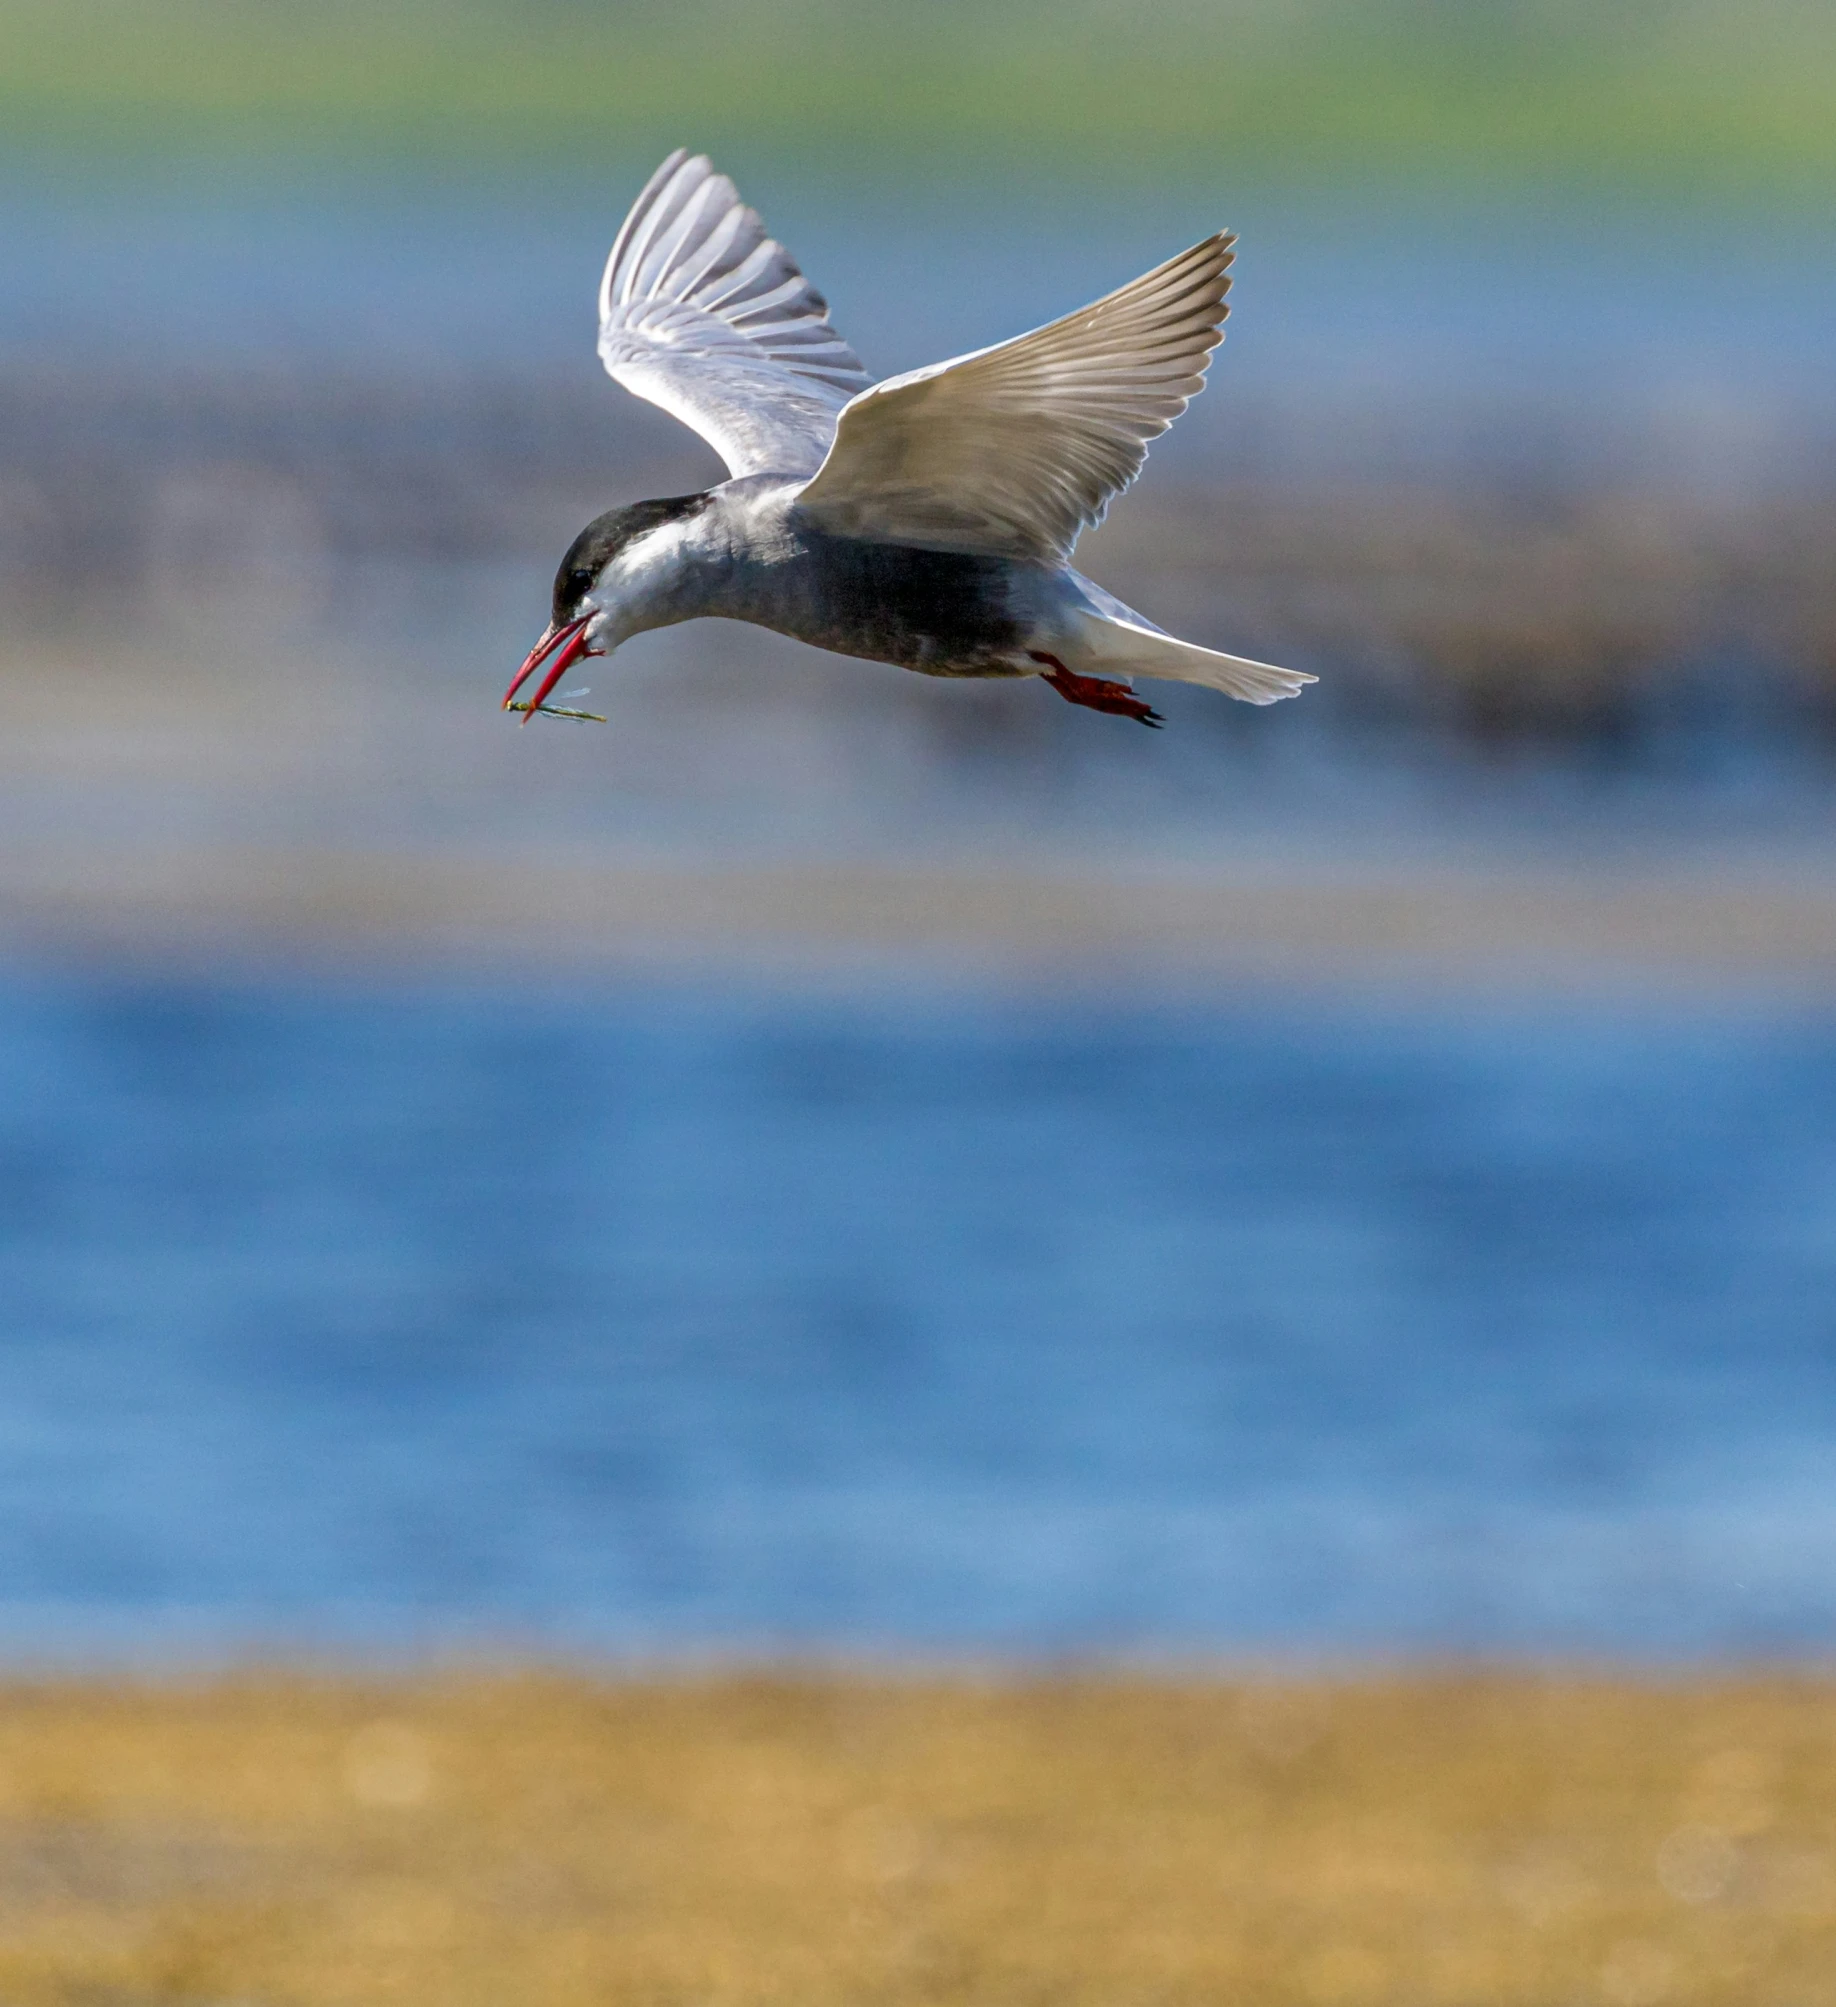 a bird flying over the ground near water